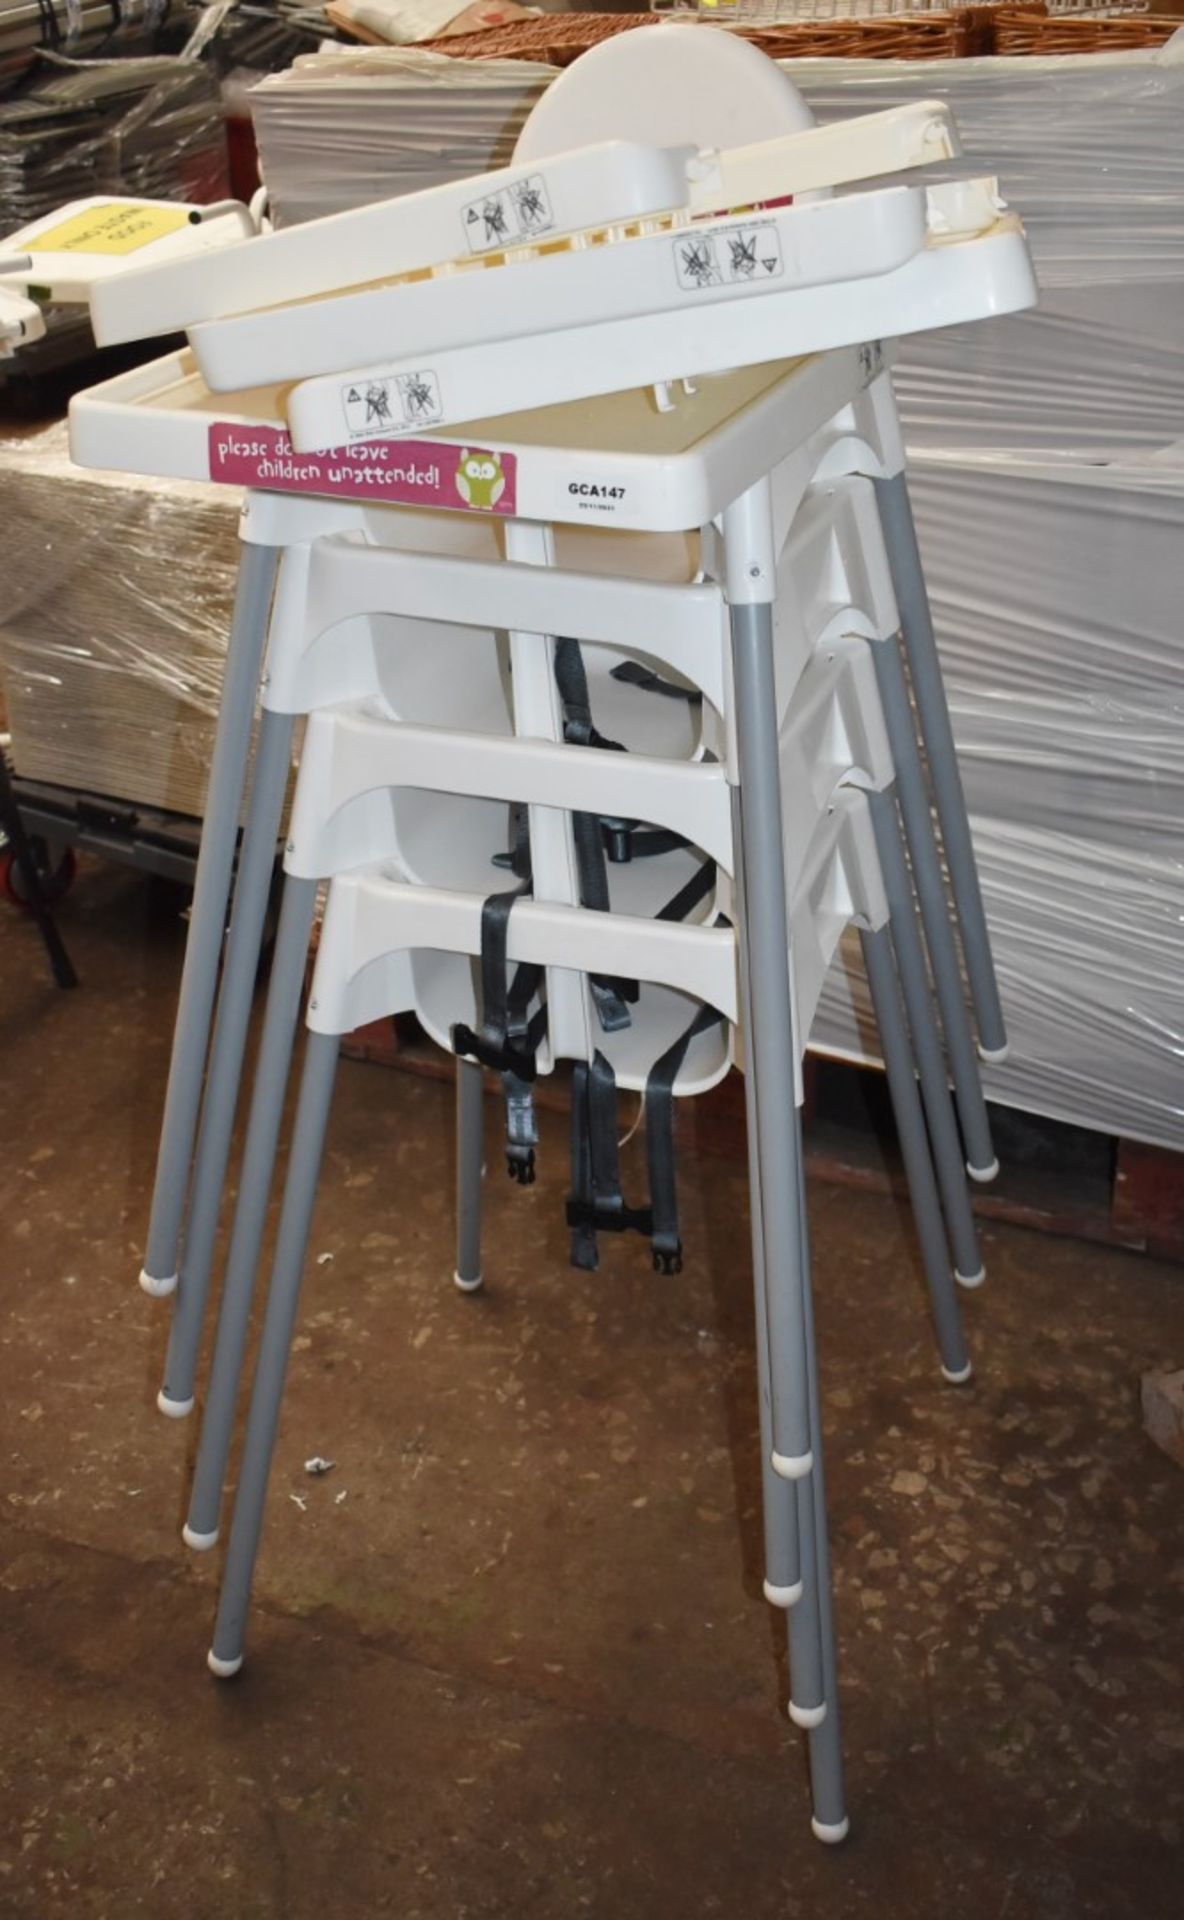 4 x Childrens High Chairs With Chairs - Recently Removed From a Supermarket Restaurant - Provided in - Image 2 of 4